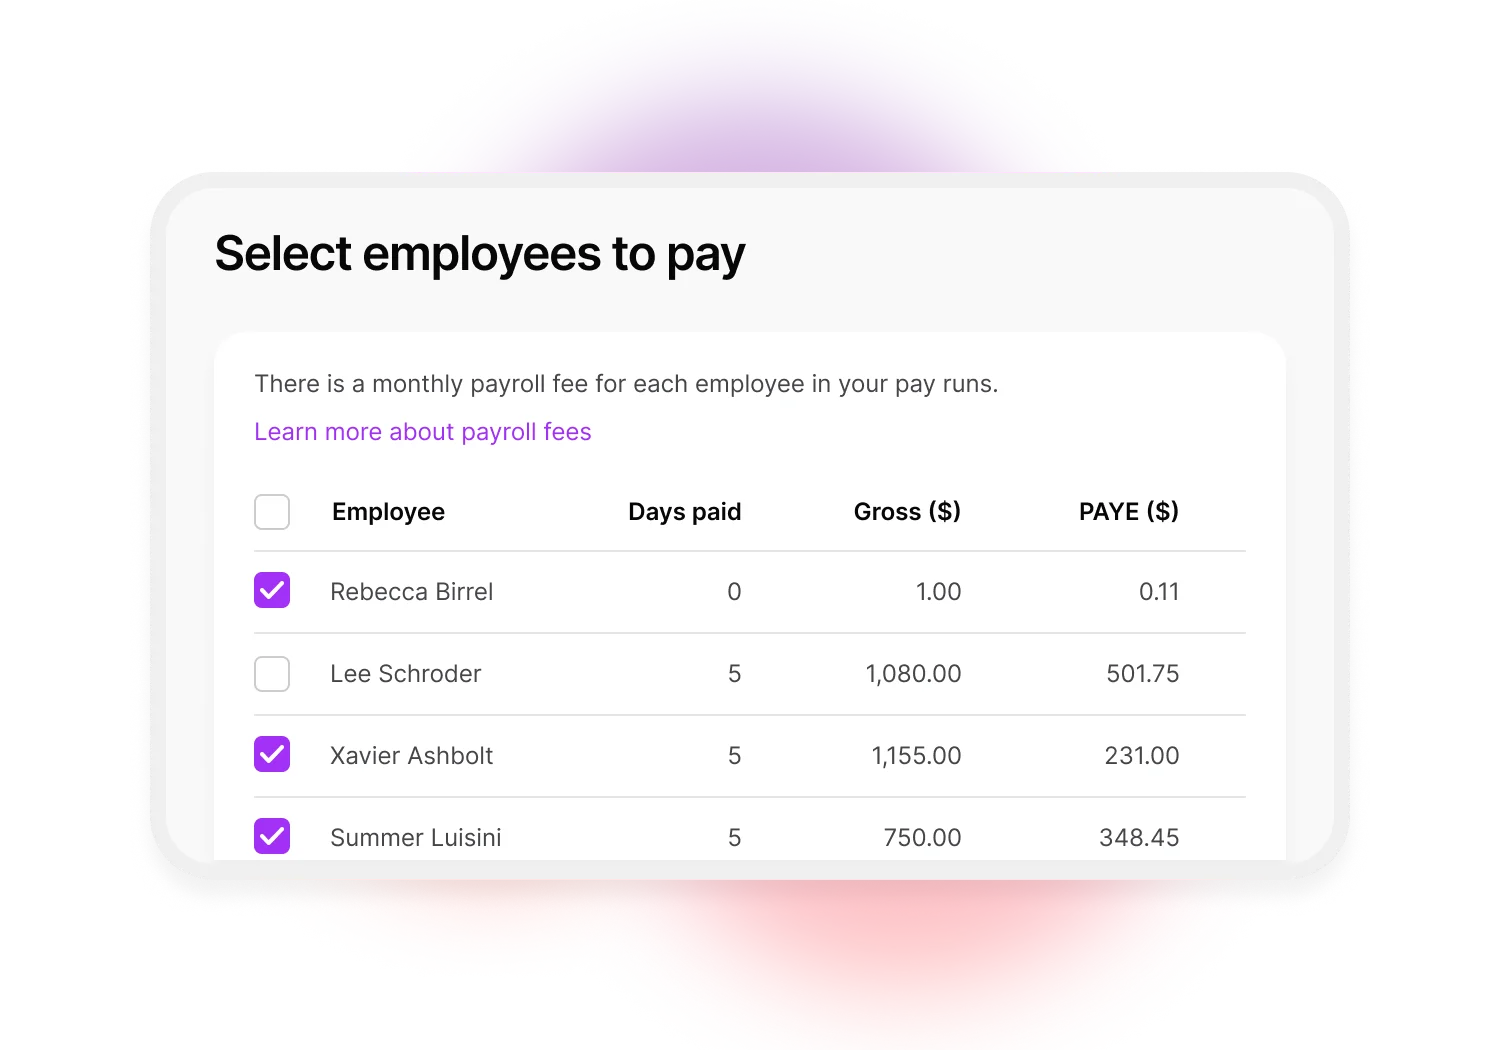 During your pay run, you'll be prompted to select which employees you're paying this cycle. The screen shows a list of employees with a check box, days paid, gross pay and PAYE tax withheld.